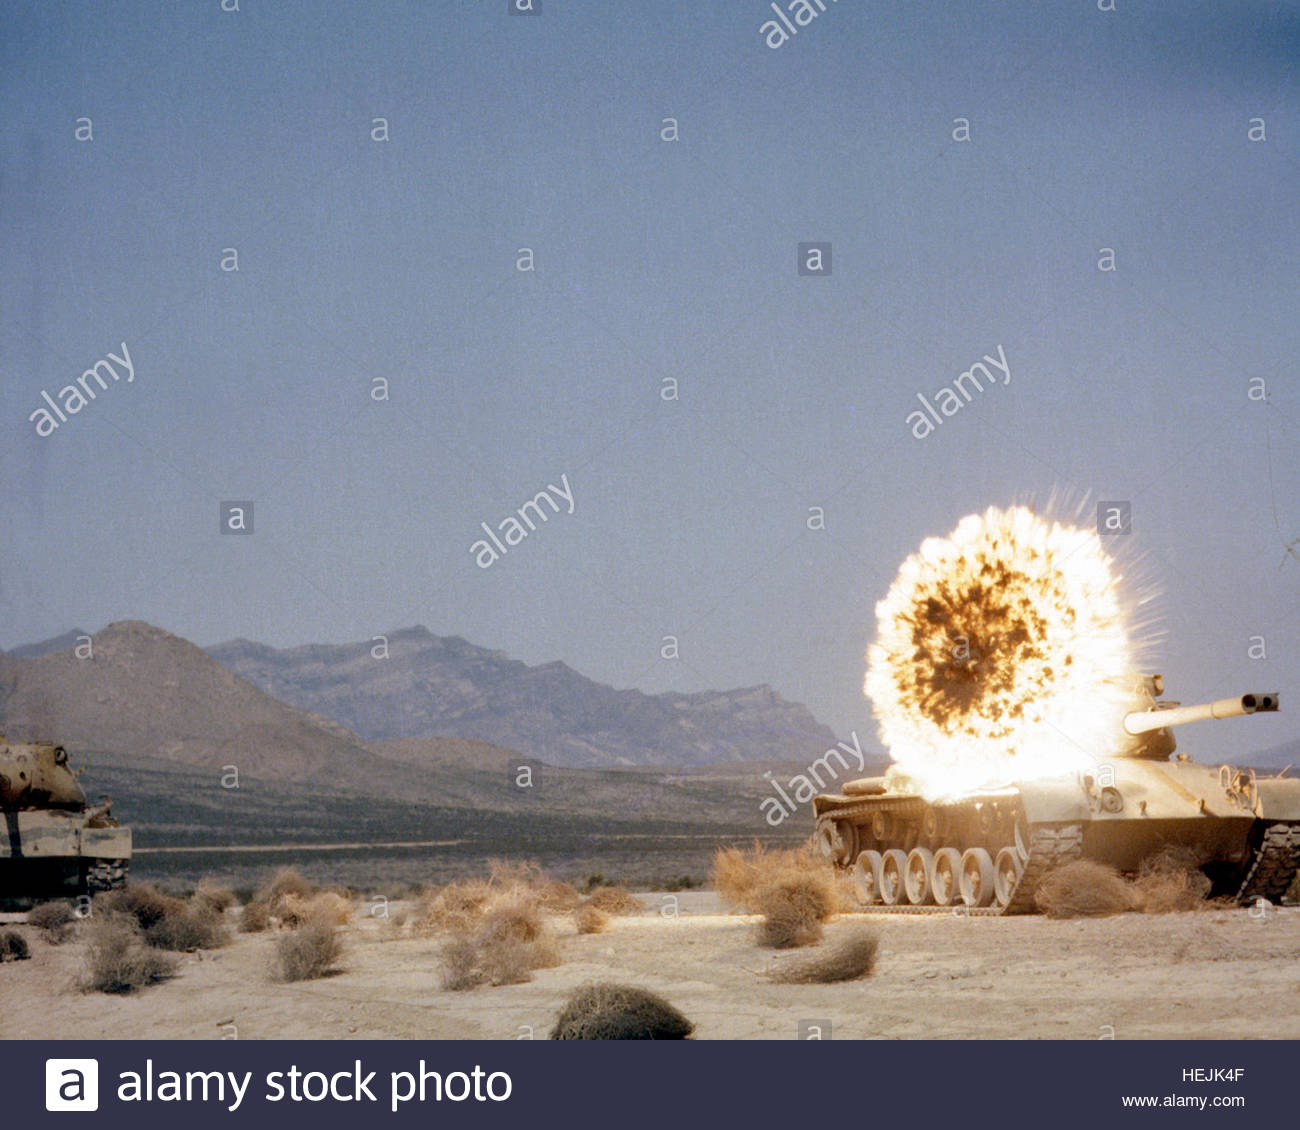 a-copperhead-laser-guided-anti-tank-missile-fired-from-a-towed-m-198-HEJK4F.jpg